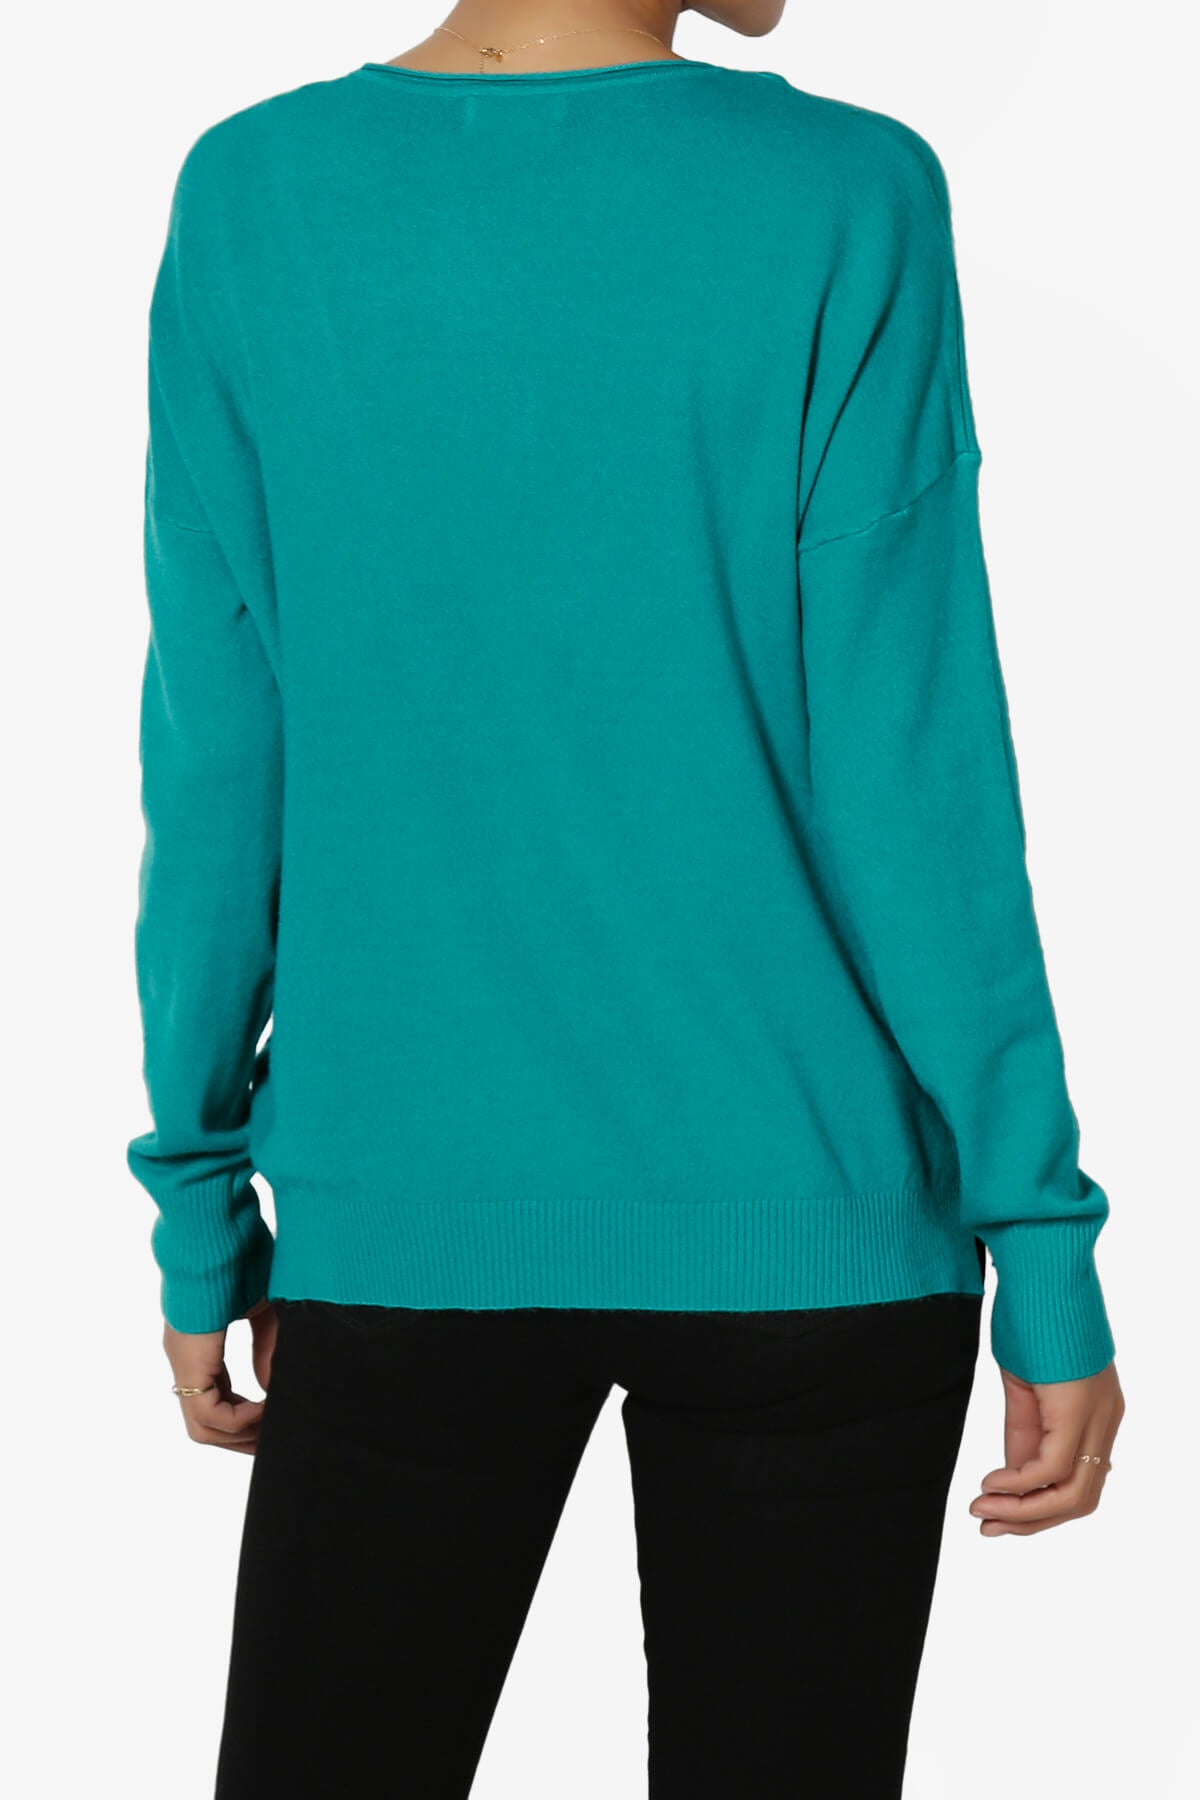 Carolina Long Sleeve Relaxed Fit Knit Top LT TEAL_2